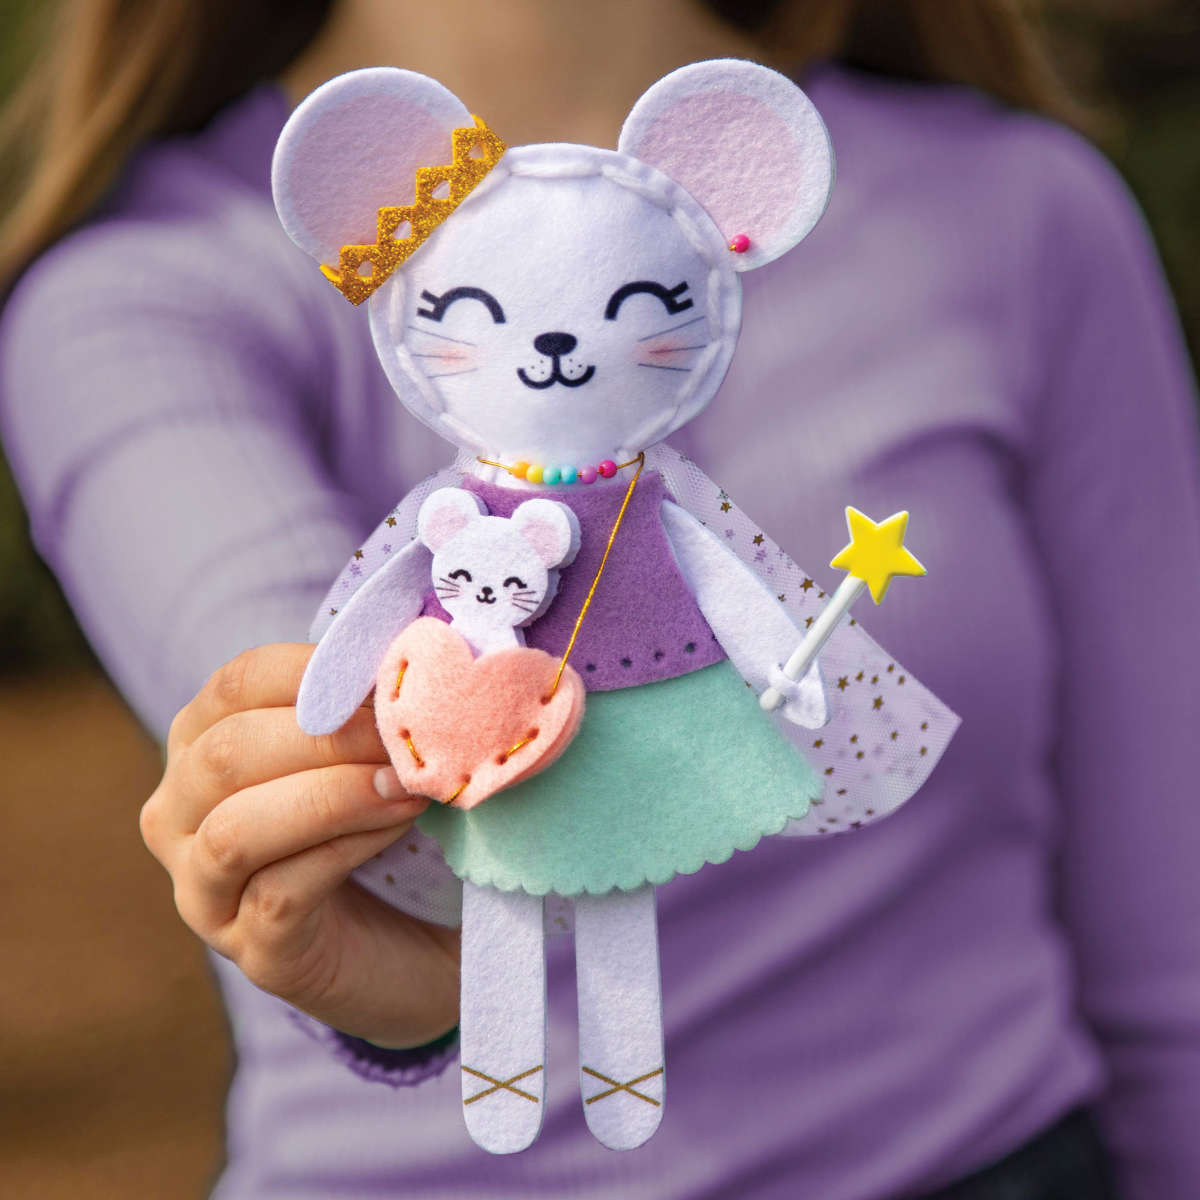 Craft-tastic Make a Mouse Friend by Ann Williams